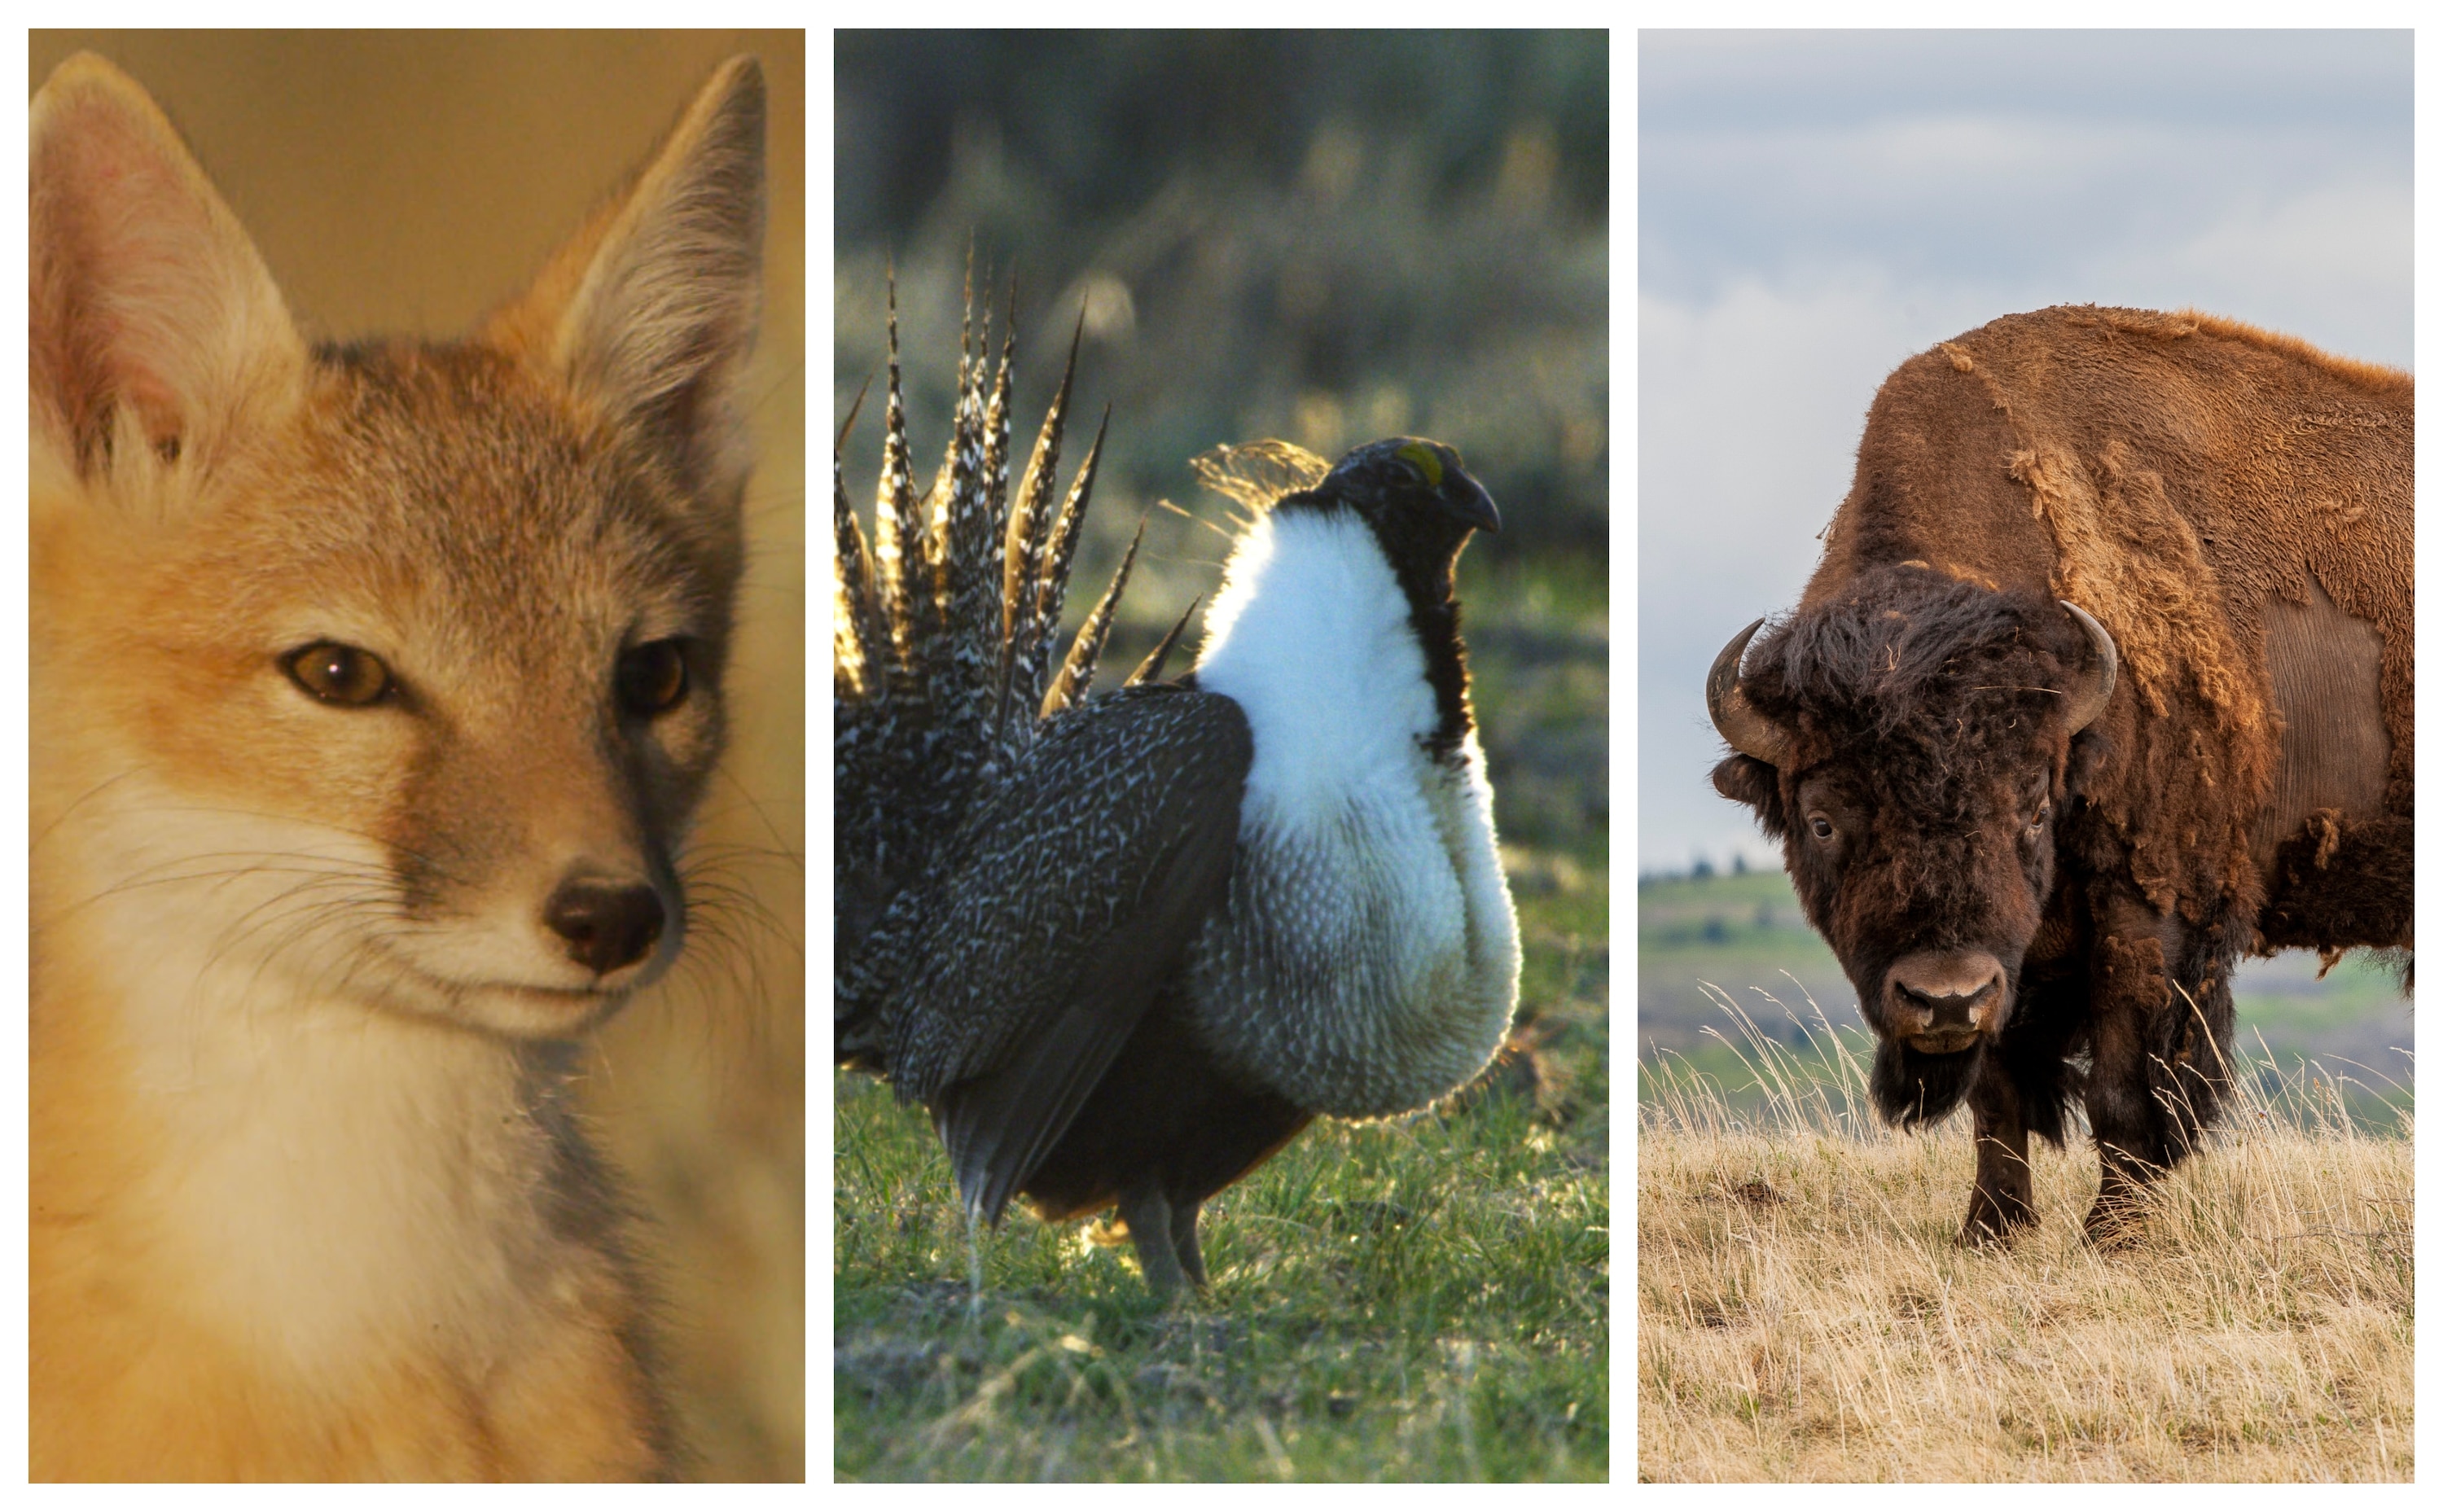 Ferrets, foxes and the fringed orchid: Species that suffer when grasslands are threatened